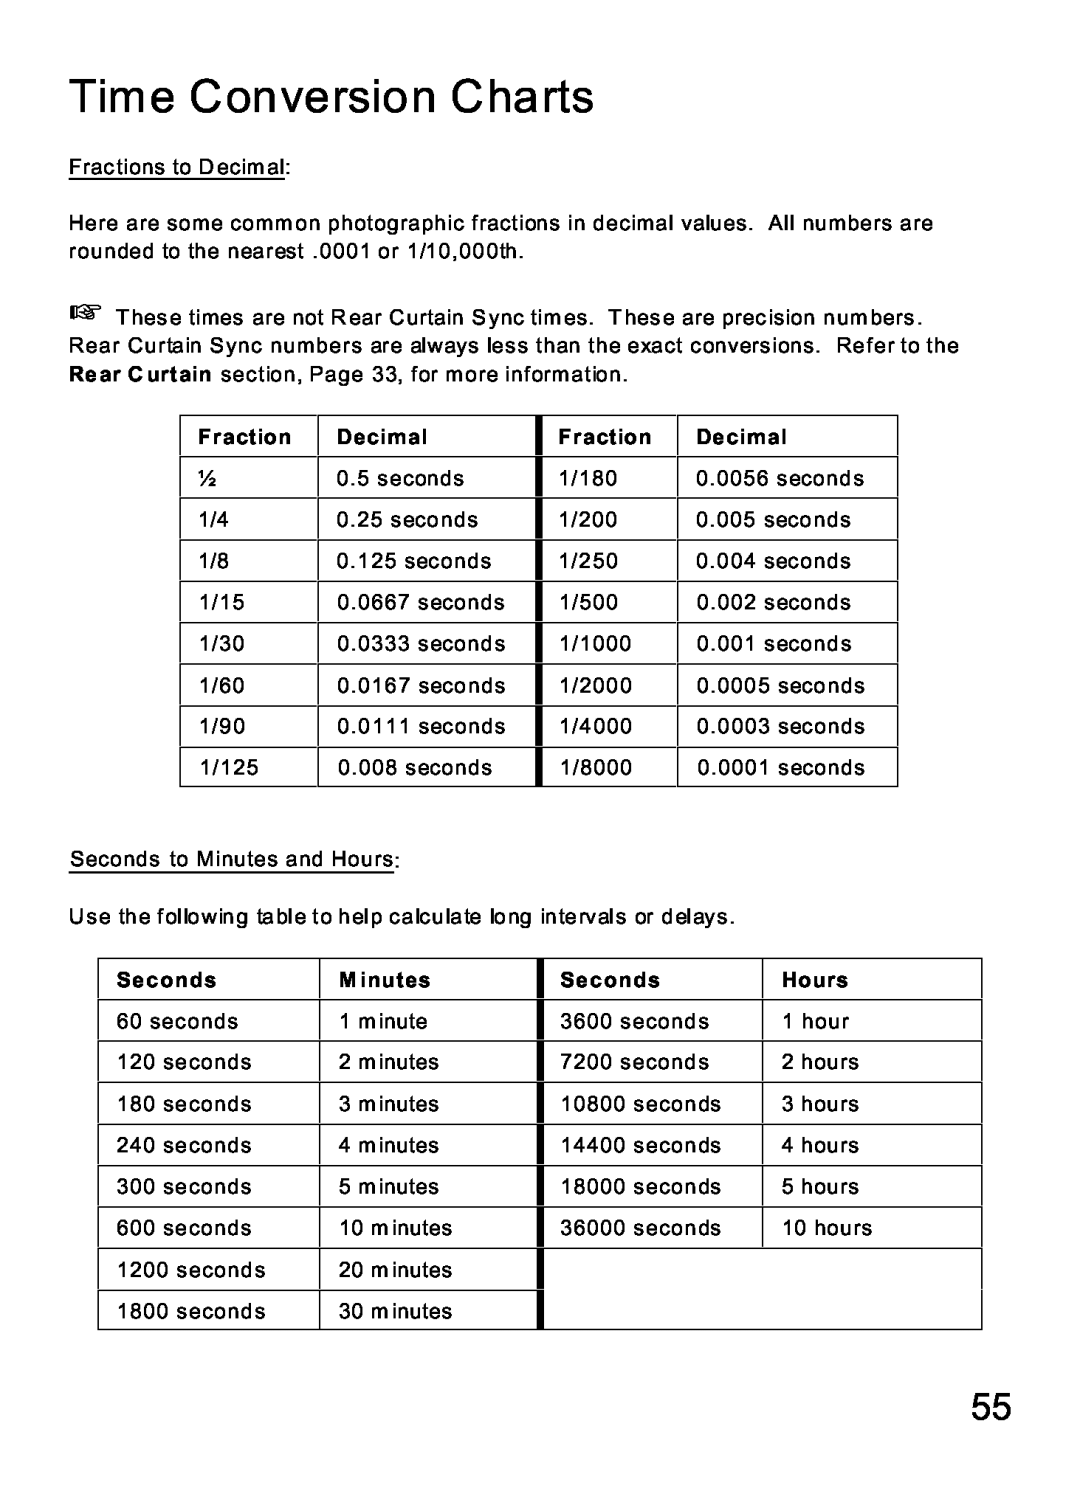 MaxTech Transceiver manual Time Conversion Charts, Fraction, Seconds, M inutes, Hours, Decimal 